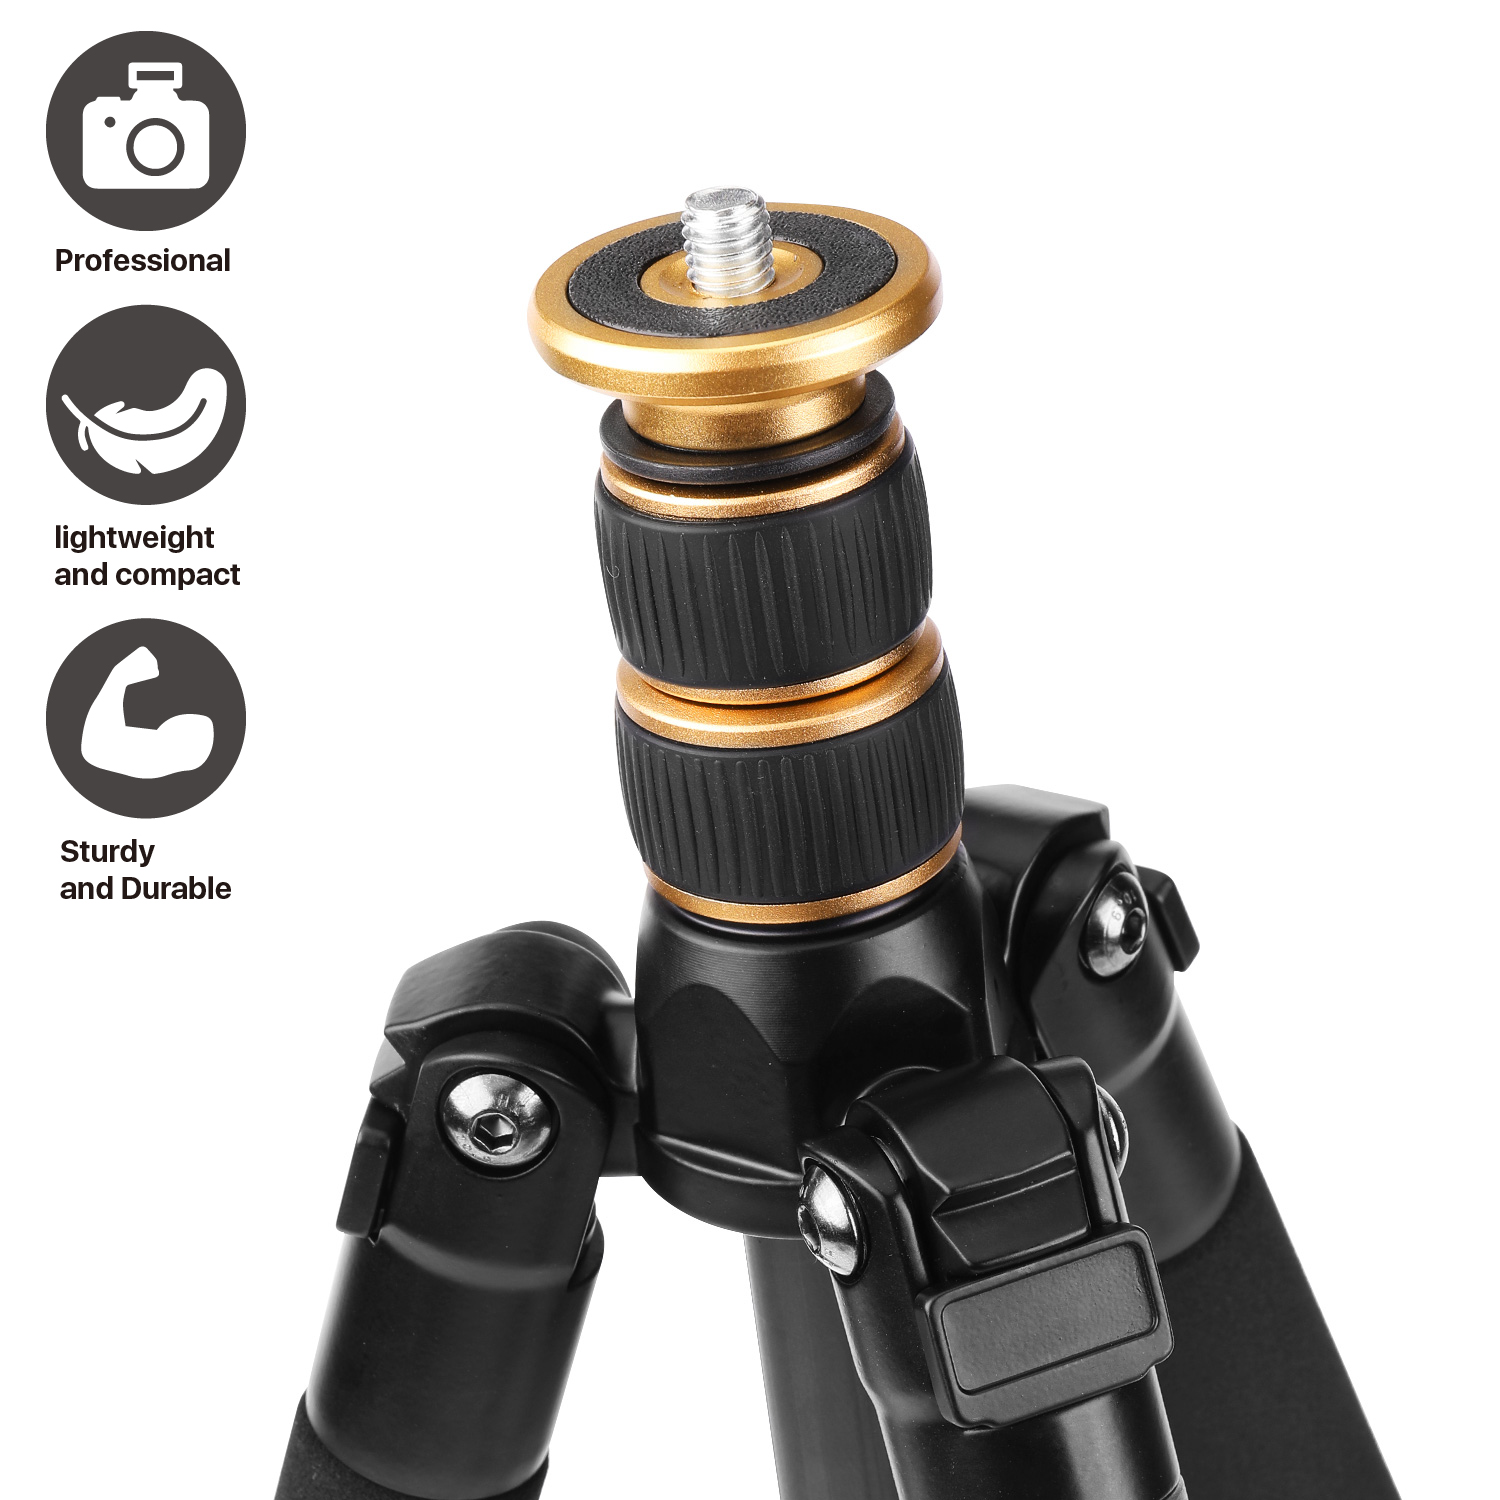 Universal ball head handle with secured clip, double securing your camera from accident dropping